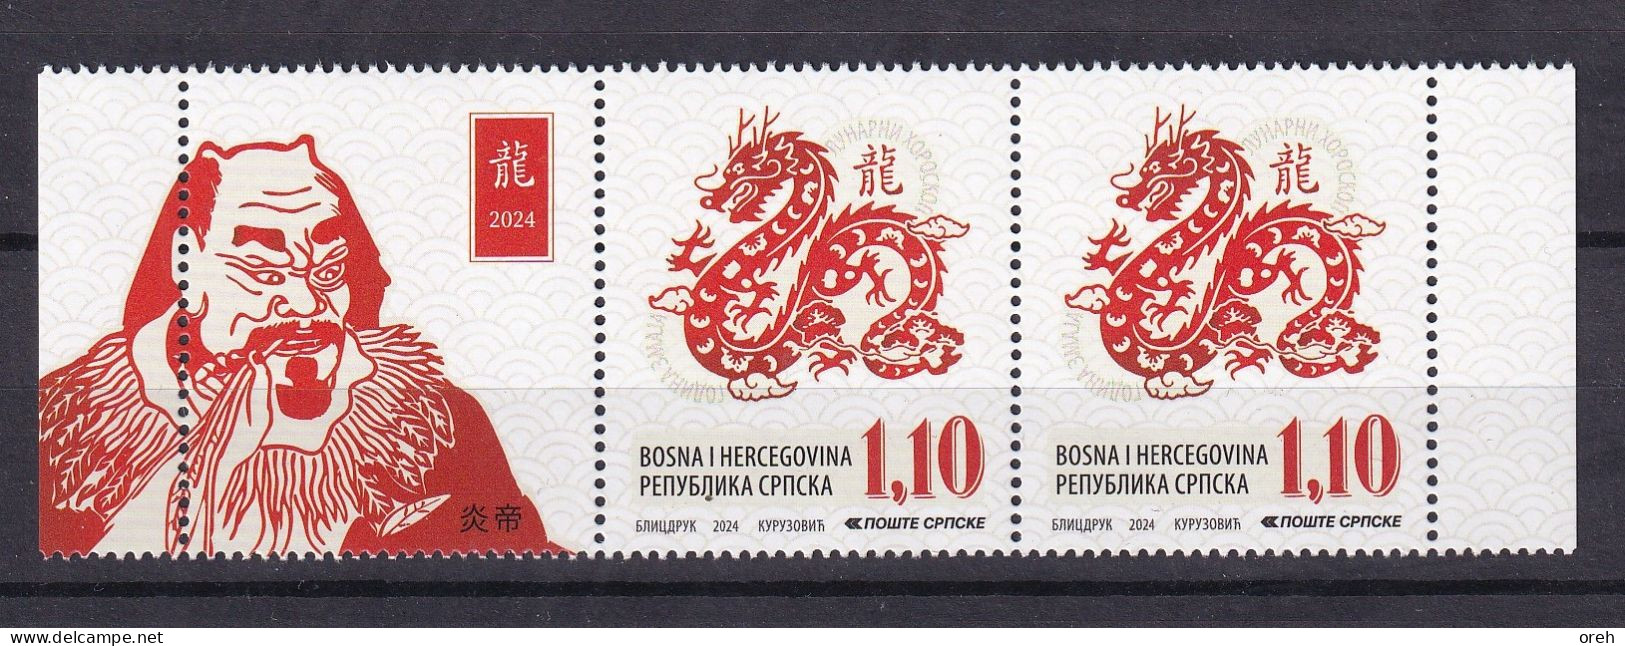 BOSNIA  AND HERZEGOVINA 2024,SERBIA BOSNIA,Chinese Lunar New Year Of The Loong Dragon Celebrations Zodiac Astrology ,MNH - Bosnia And Herzegovina